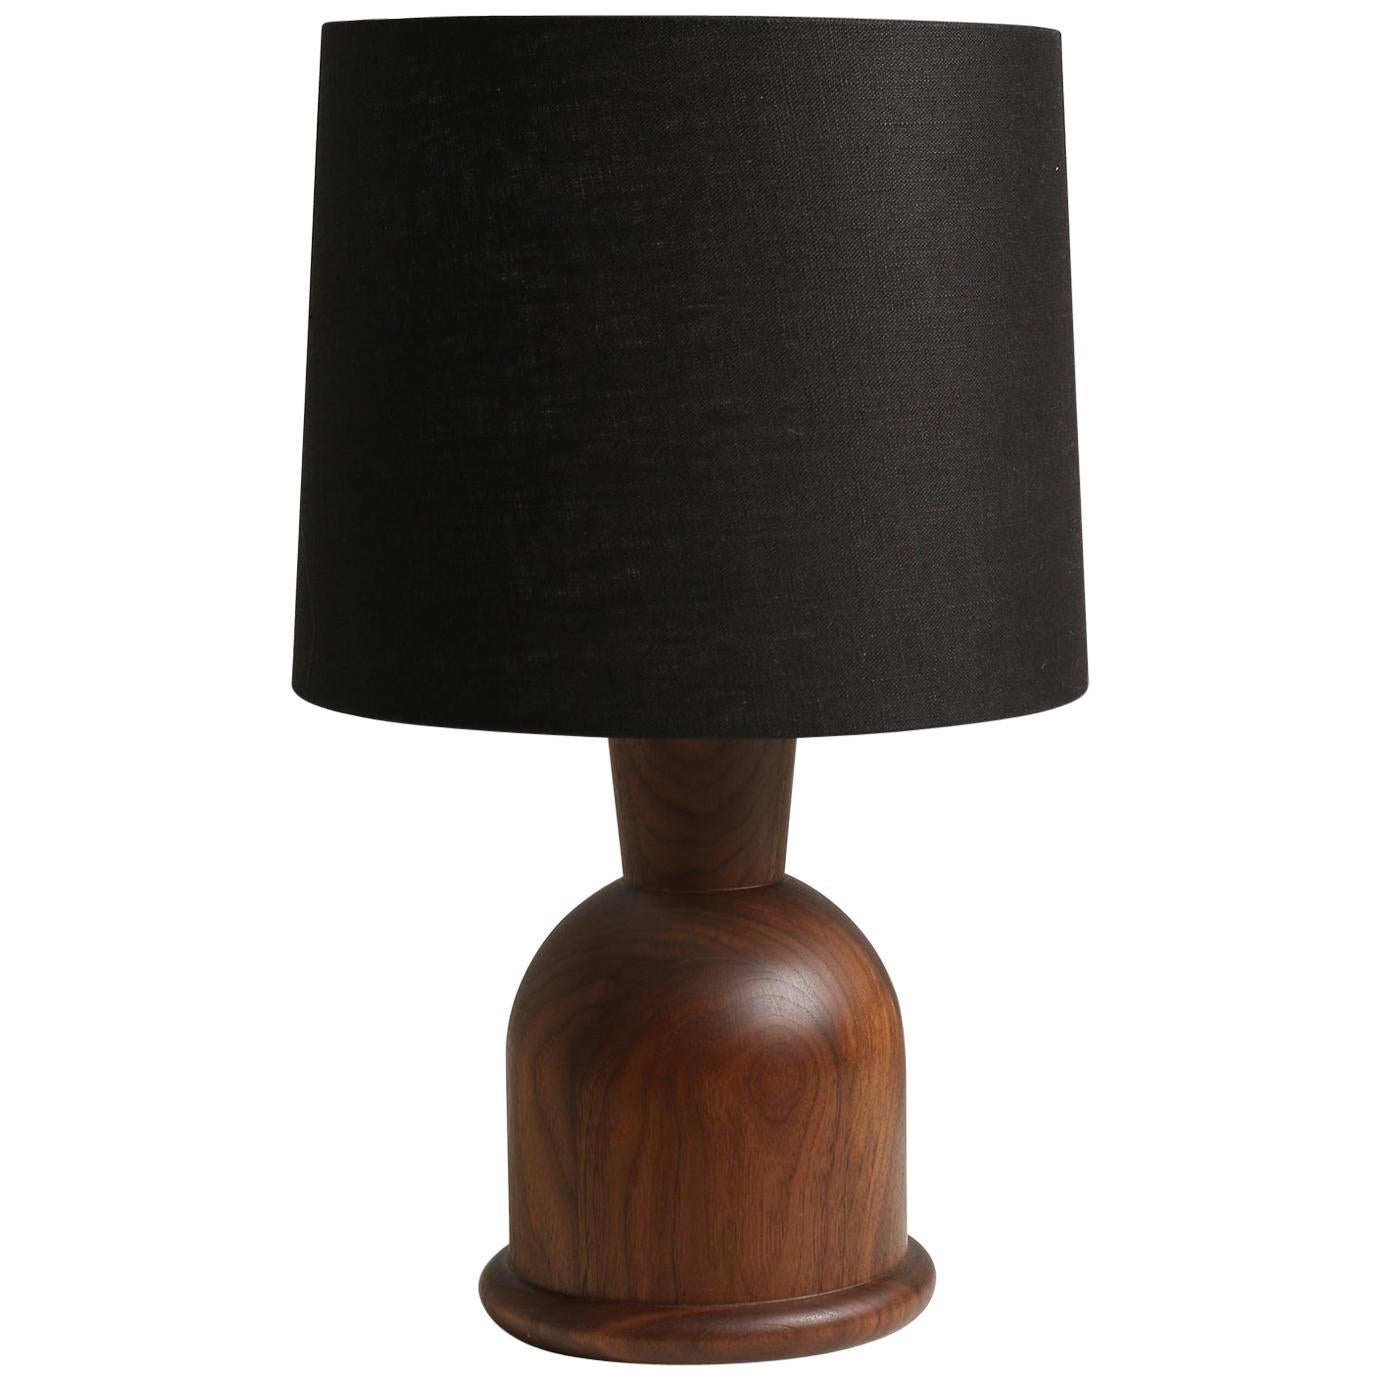 Beacon Small Table Lamp with Walnut Body and Black Linen Shade by Studio Dunn